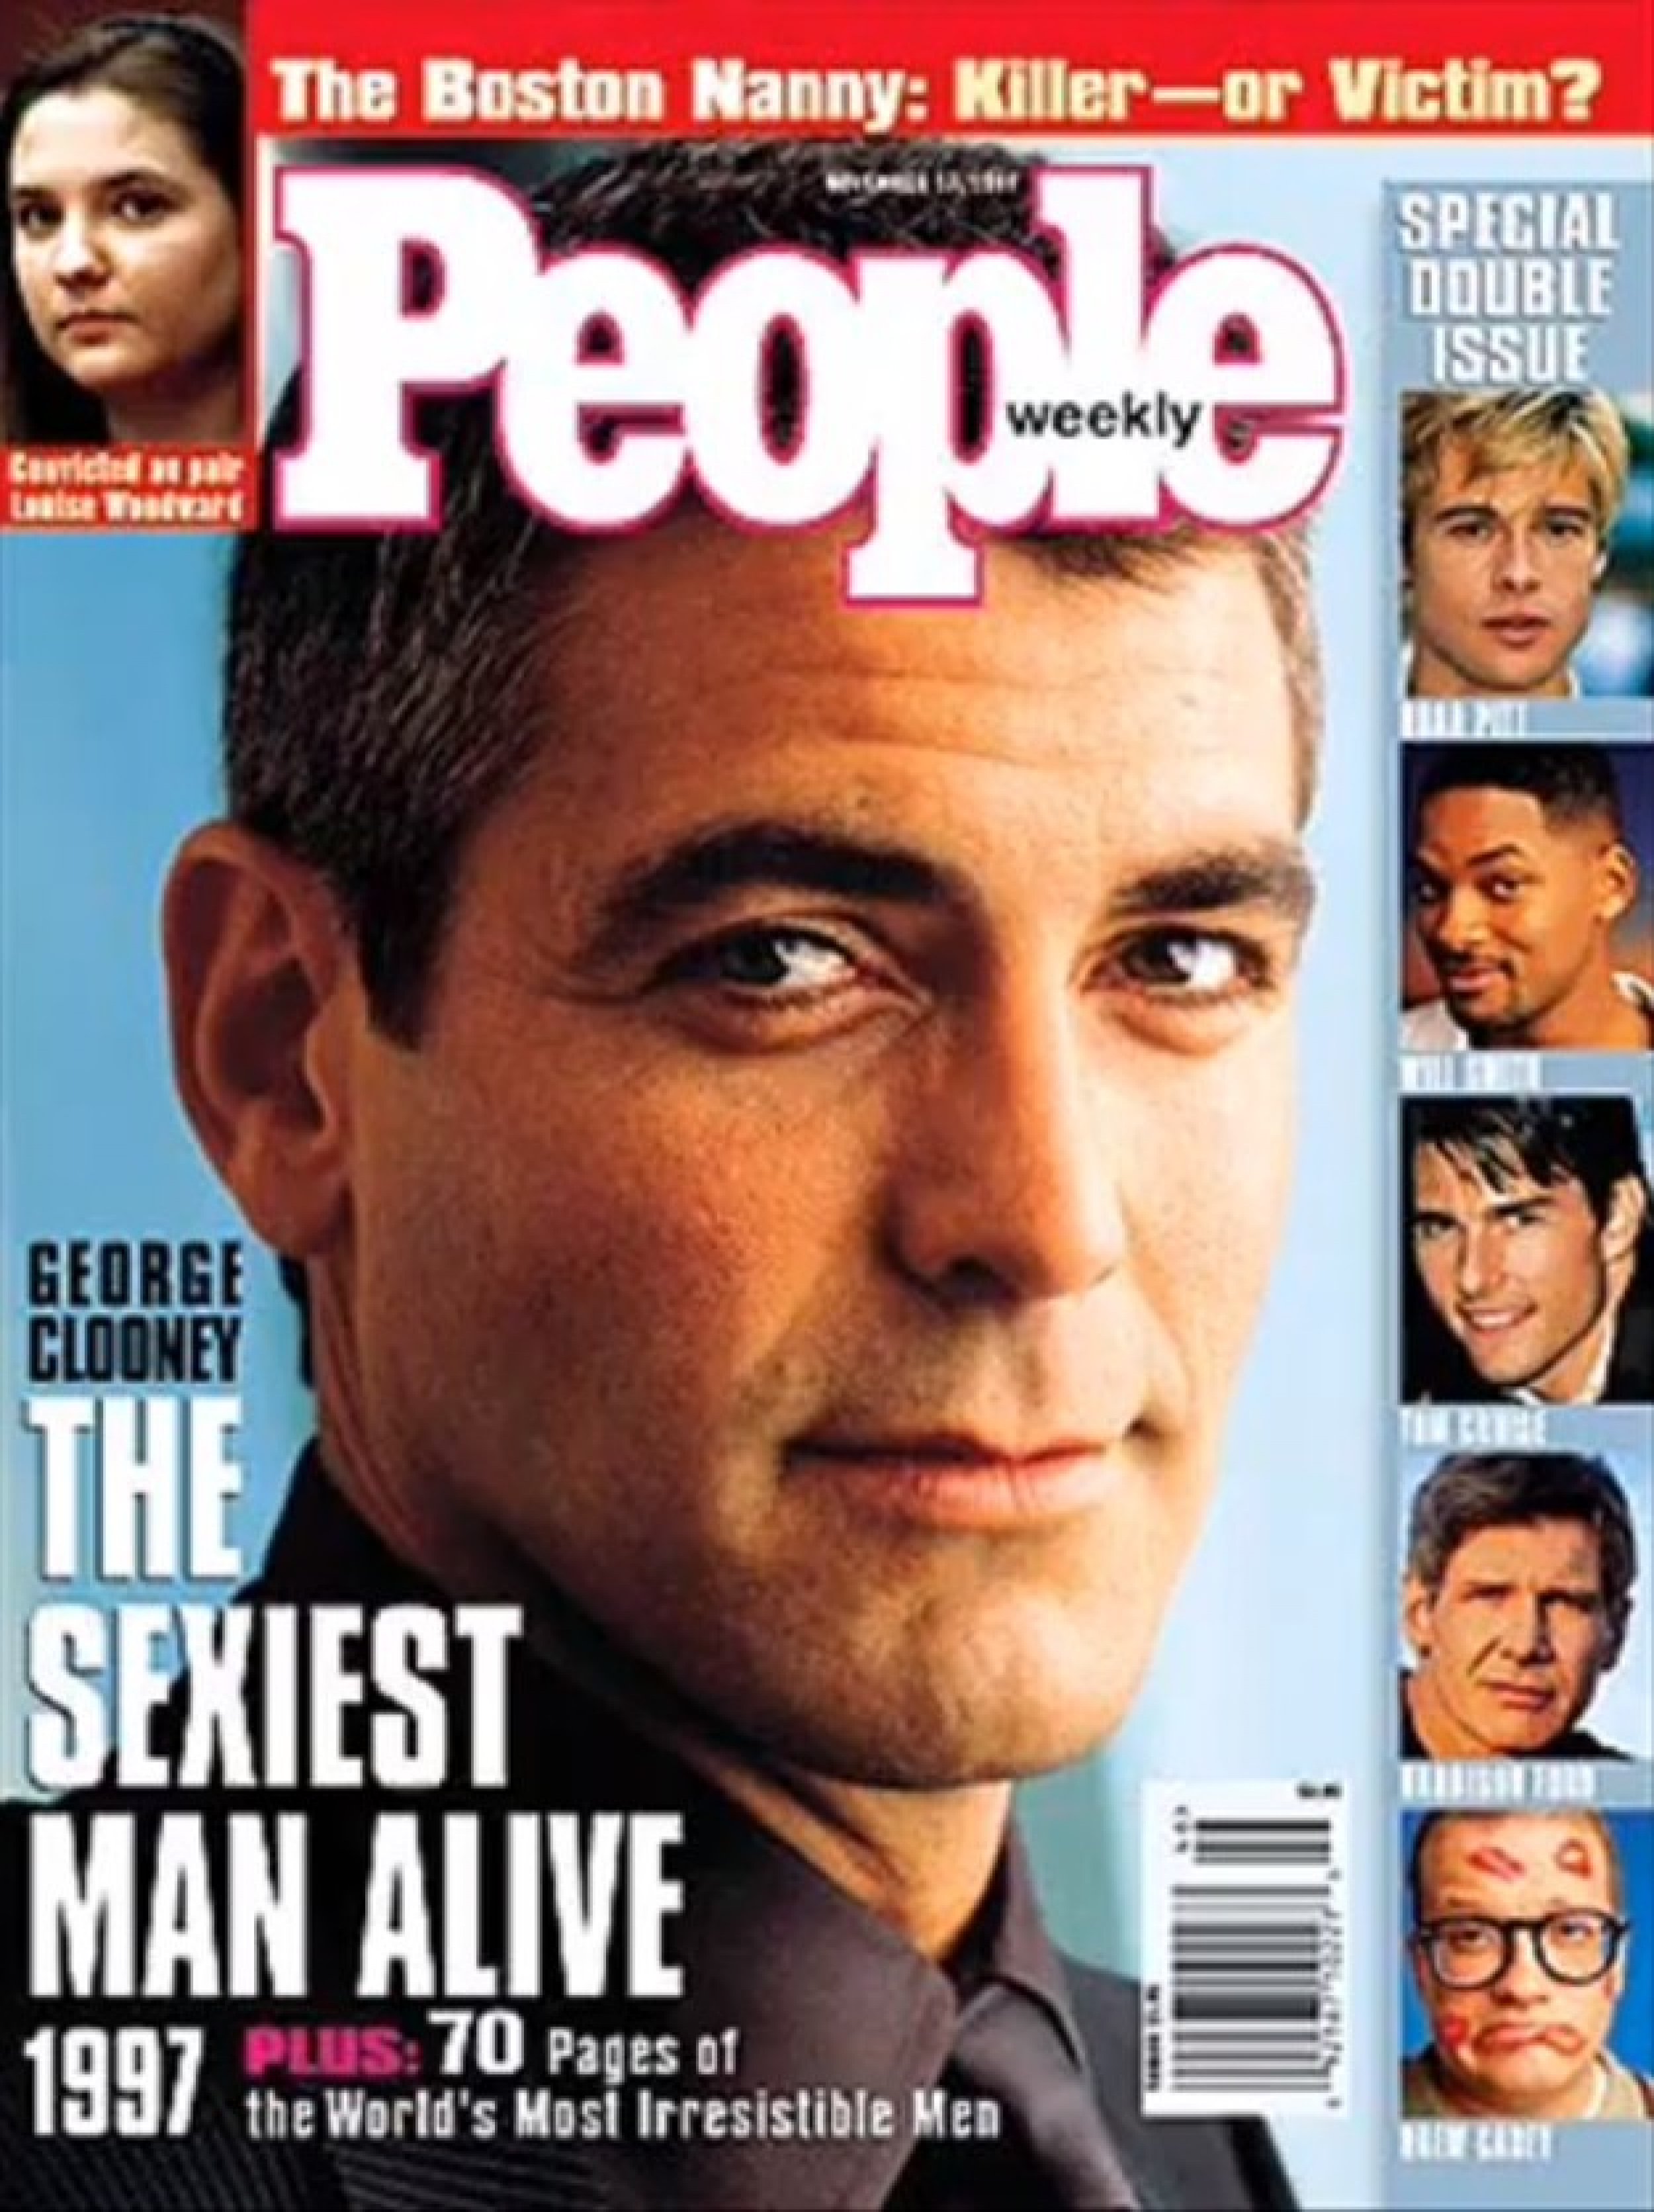 People S Sexiest Man Alive Winners From The Past 20 Years [photos] Ibtimes